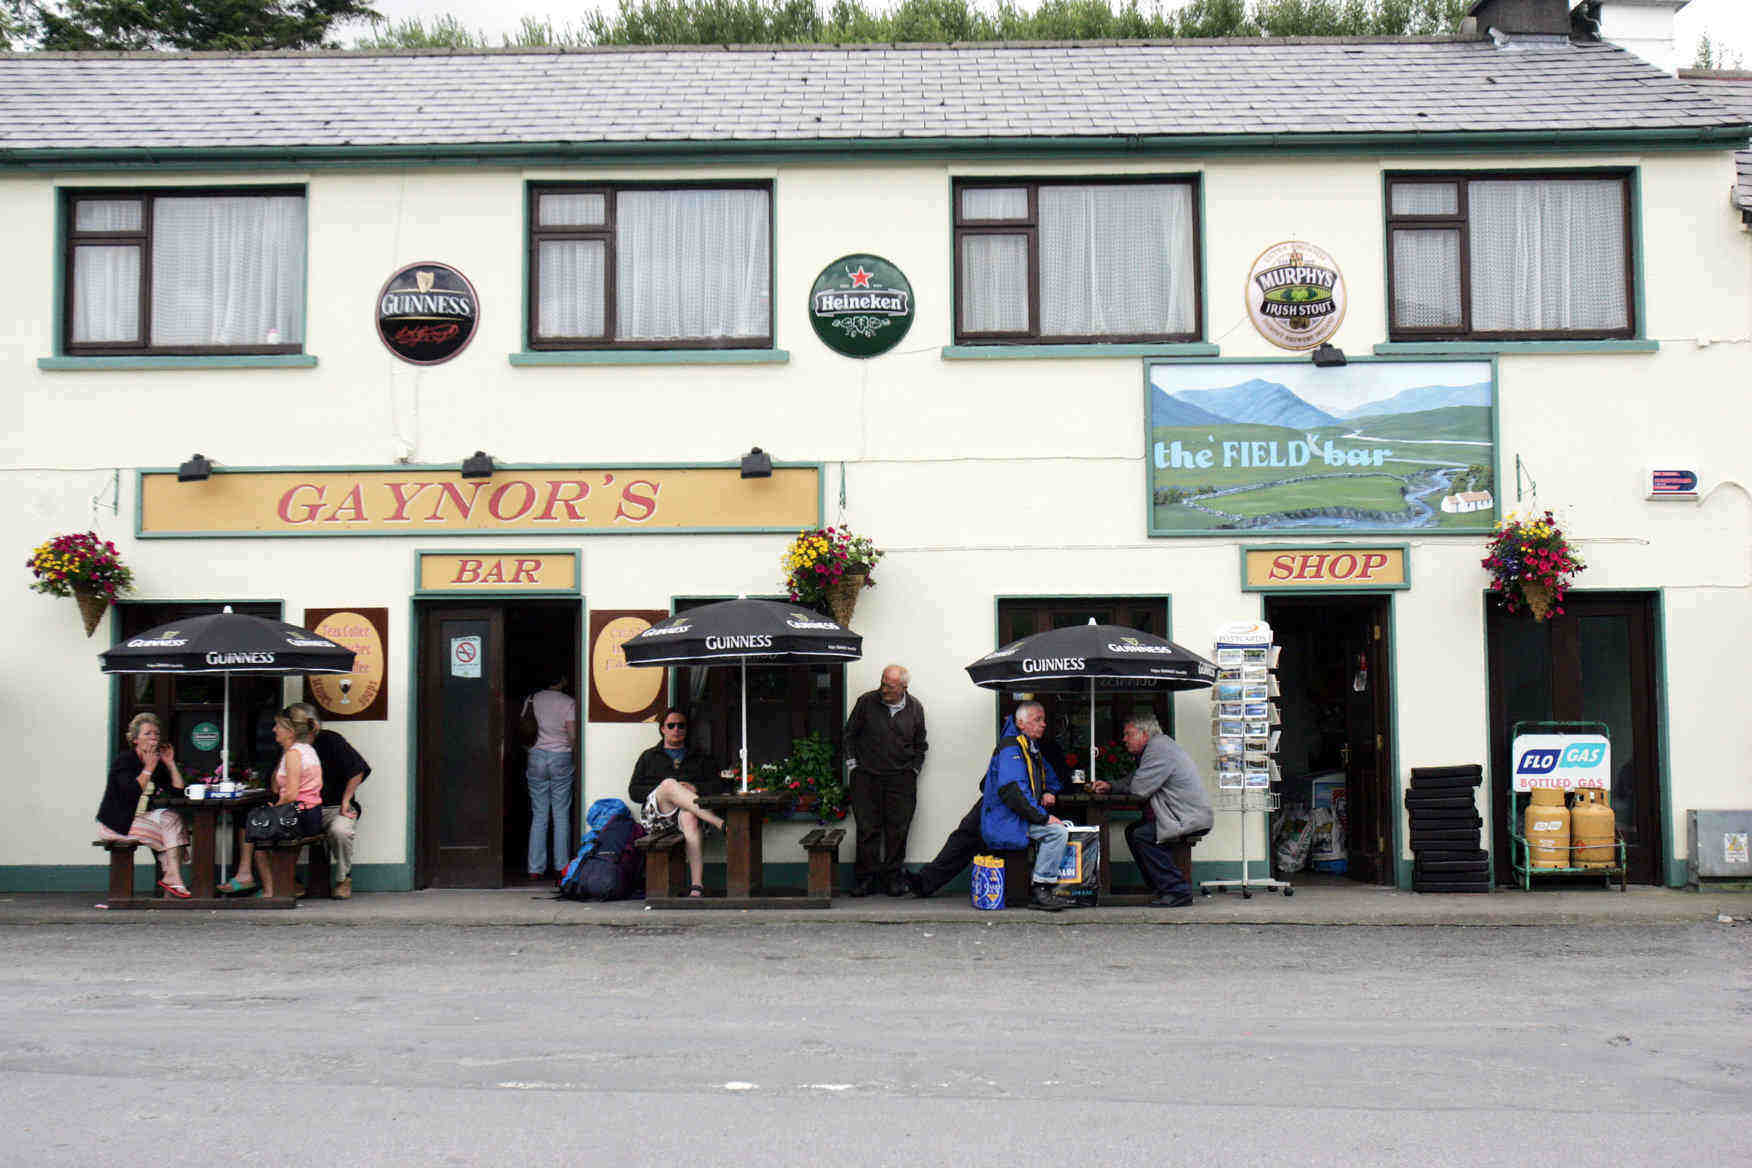 “Visitors from across the world travel to Ireland to experience the ambience of an authentic pub”.